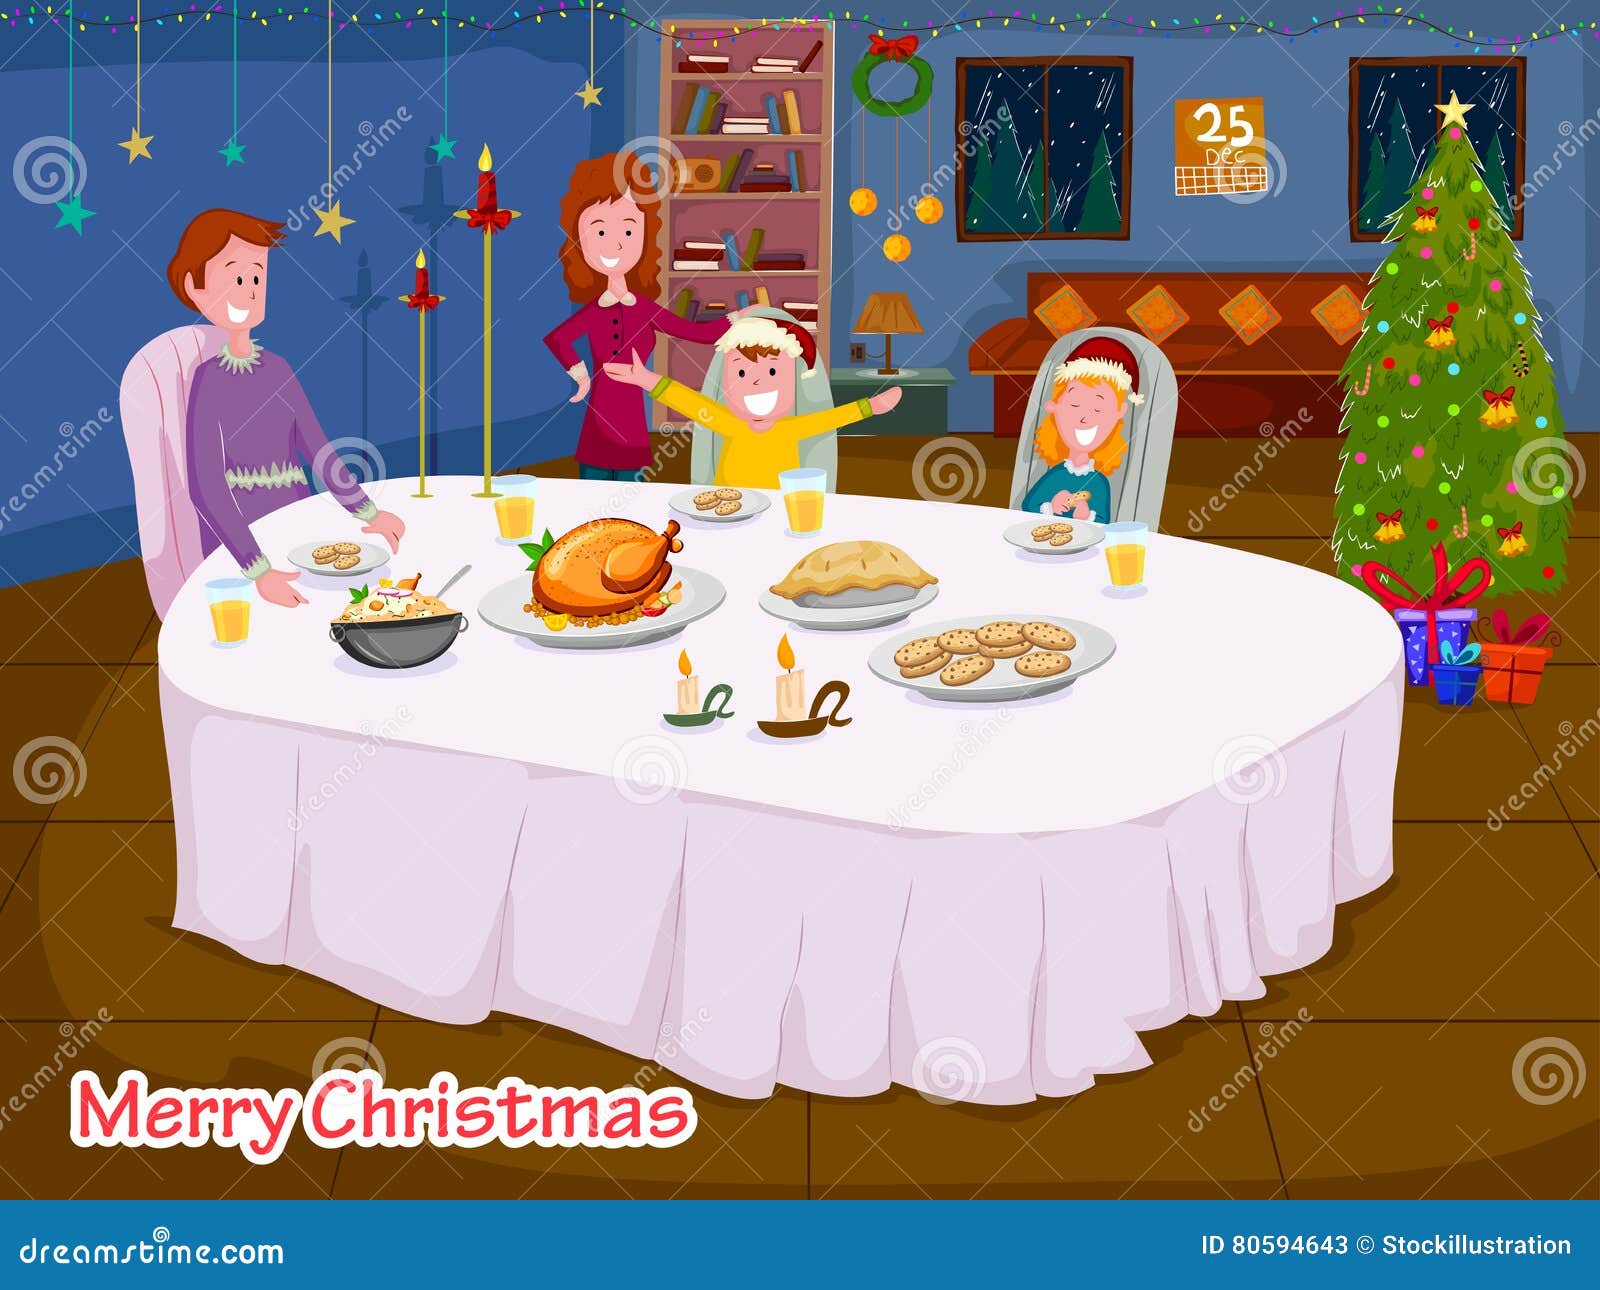 Happy Family Enjoying Meal at Dinner Table Celebrating Merry Christmas ...